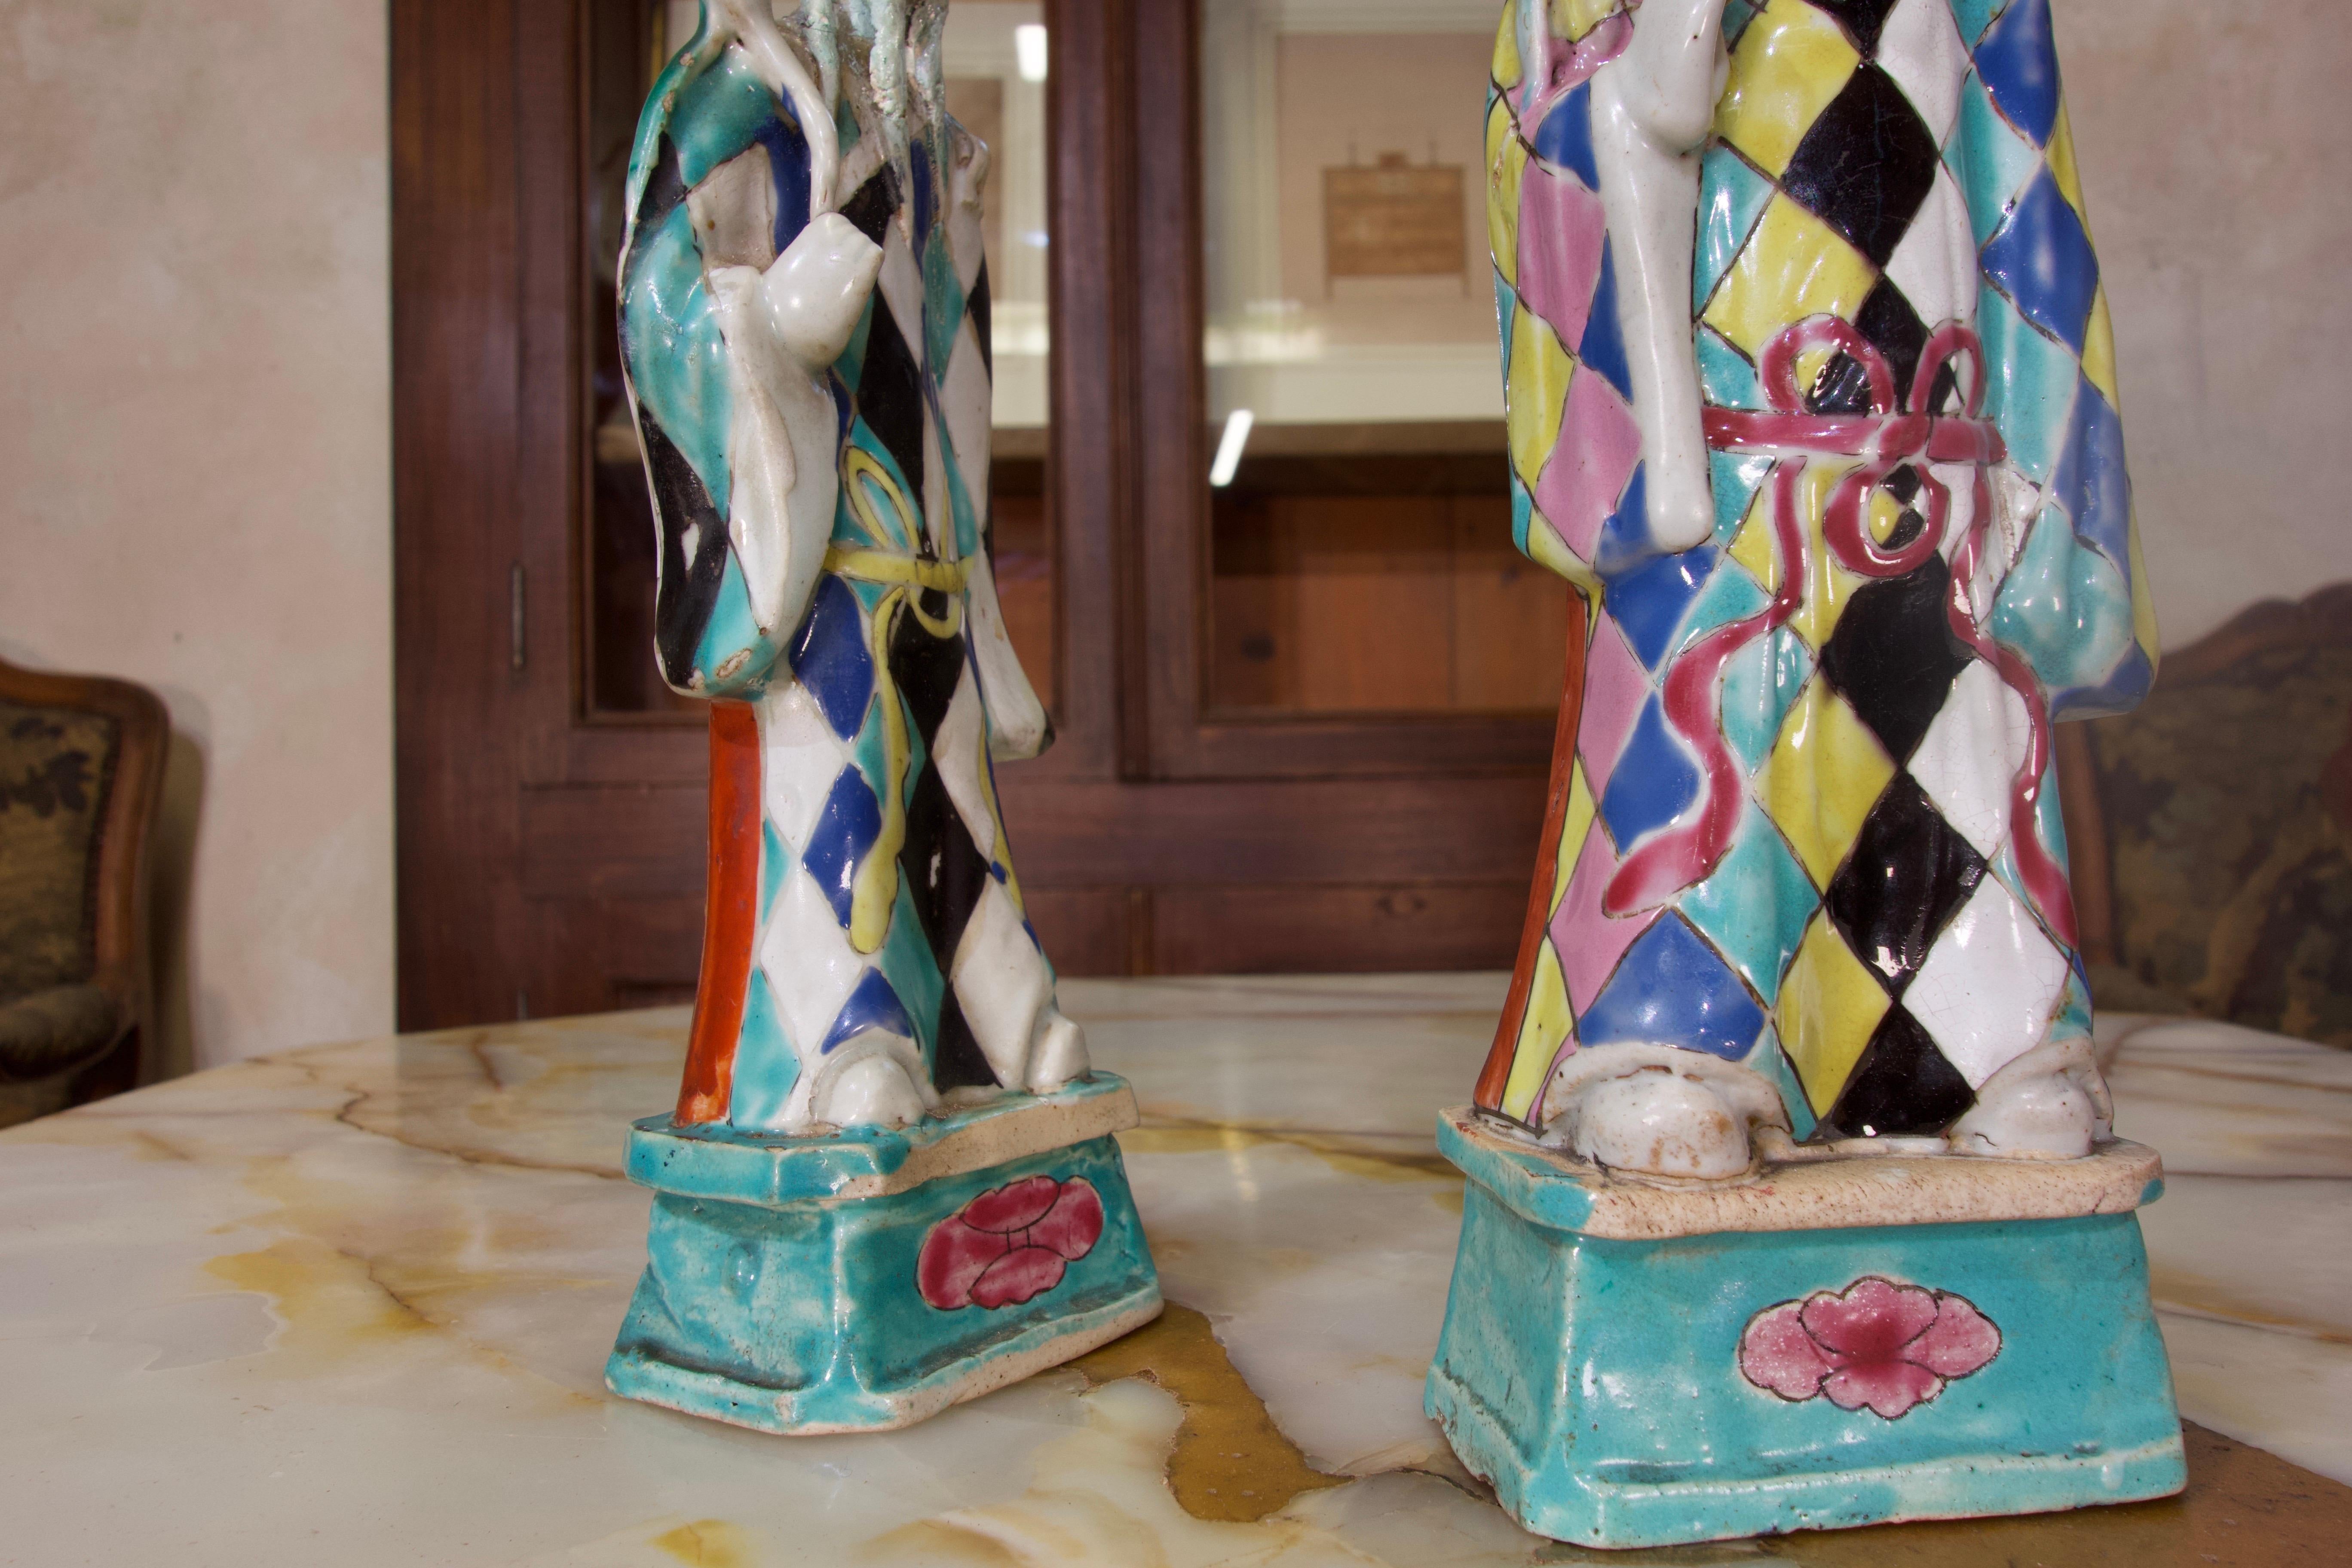 A charming near pair of 18th century Chinese export Immortals. Standing on rectangular bases, modelled in porcelain. The pair features a Harlequin pattern design to their robes, decorated in opaque enamels.

Specifically depicting Lü Dongbin often